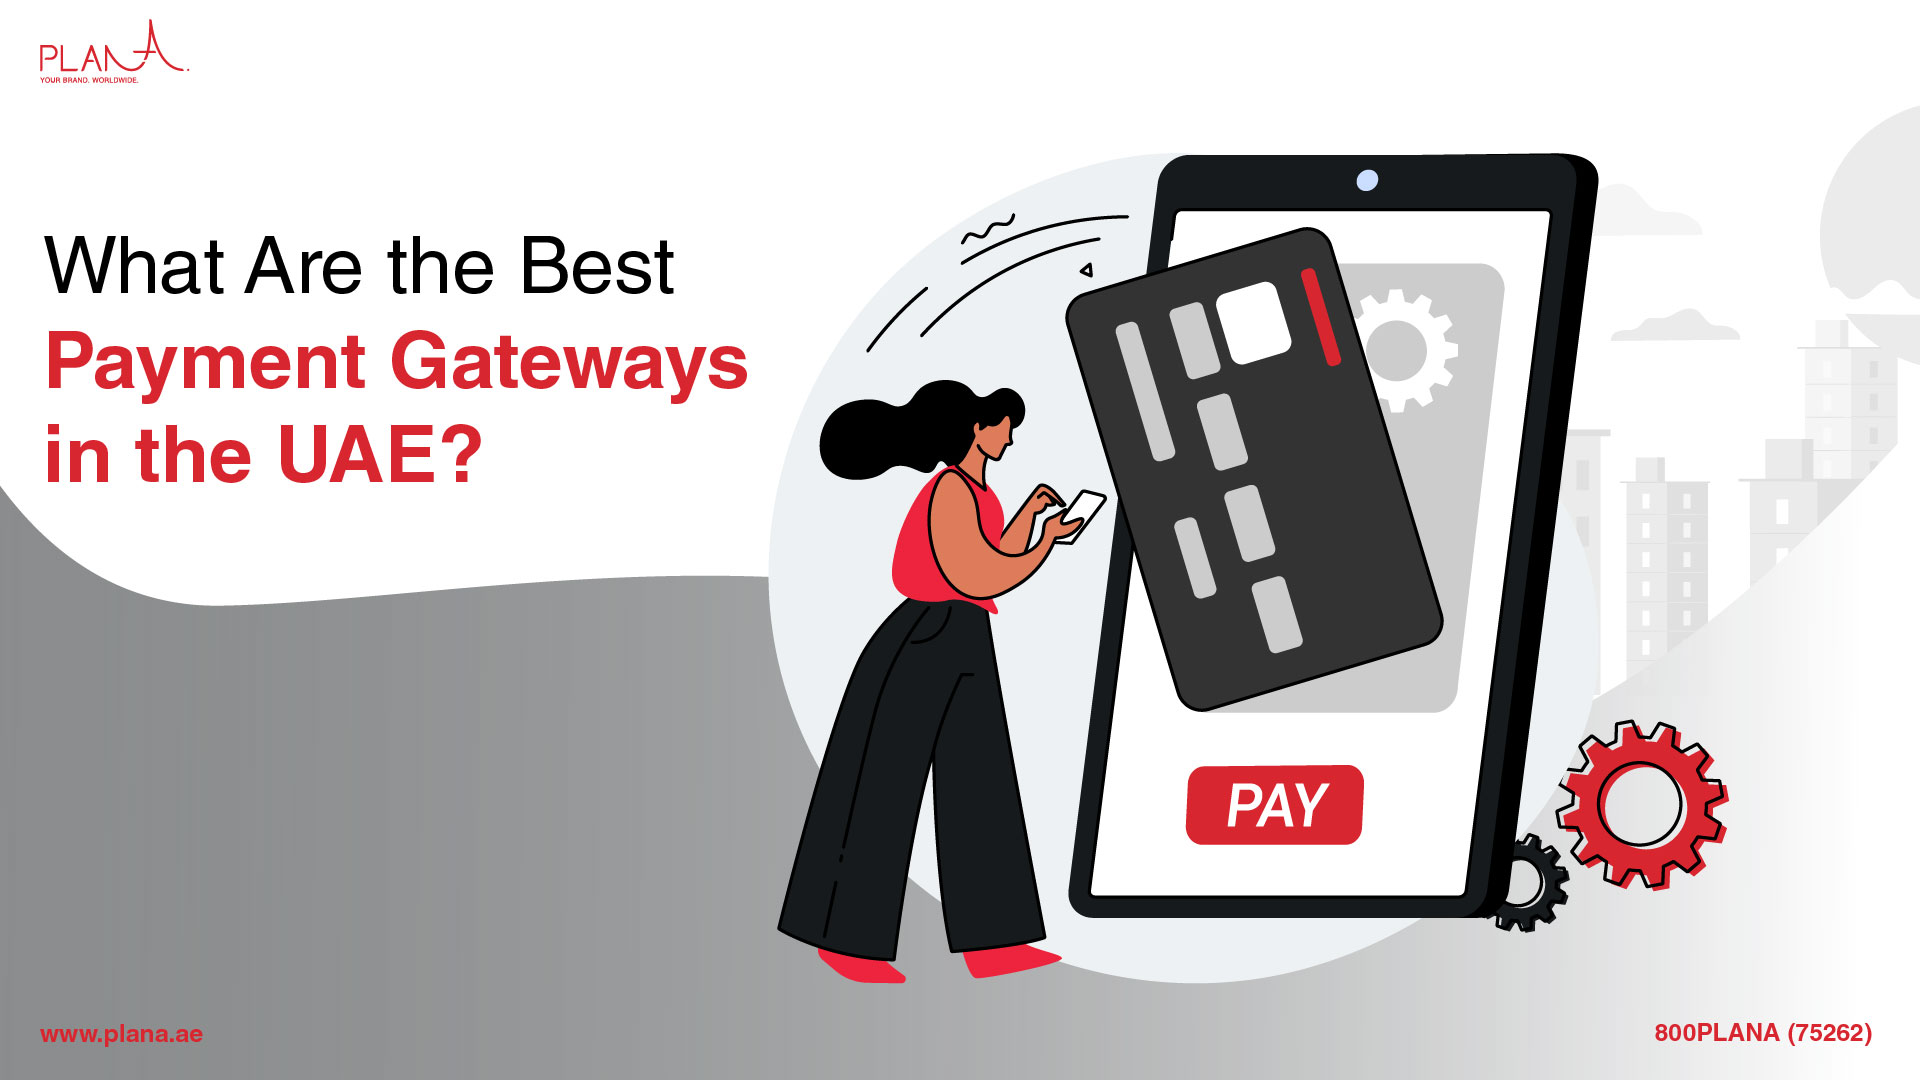 What Are the Best Payment Gateways in the UAE?